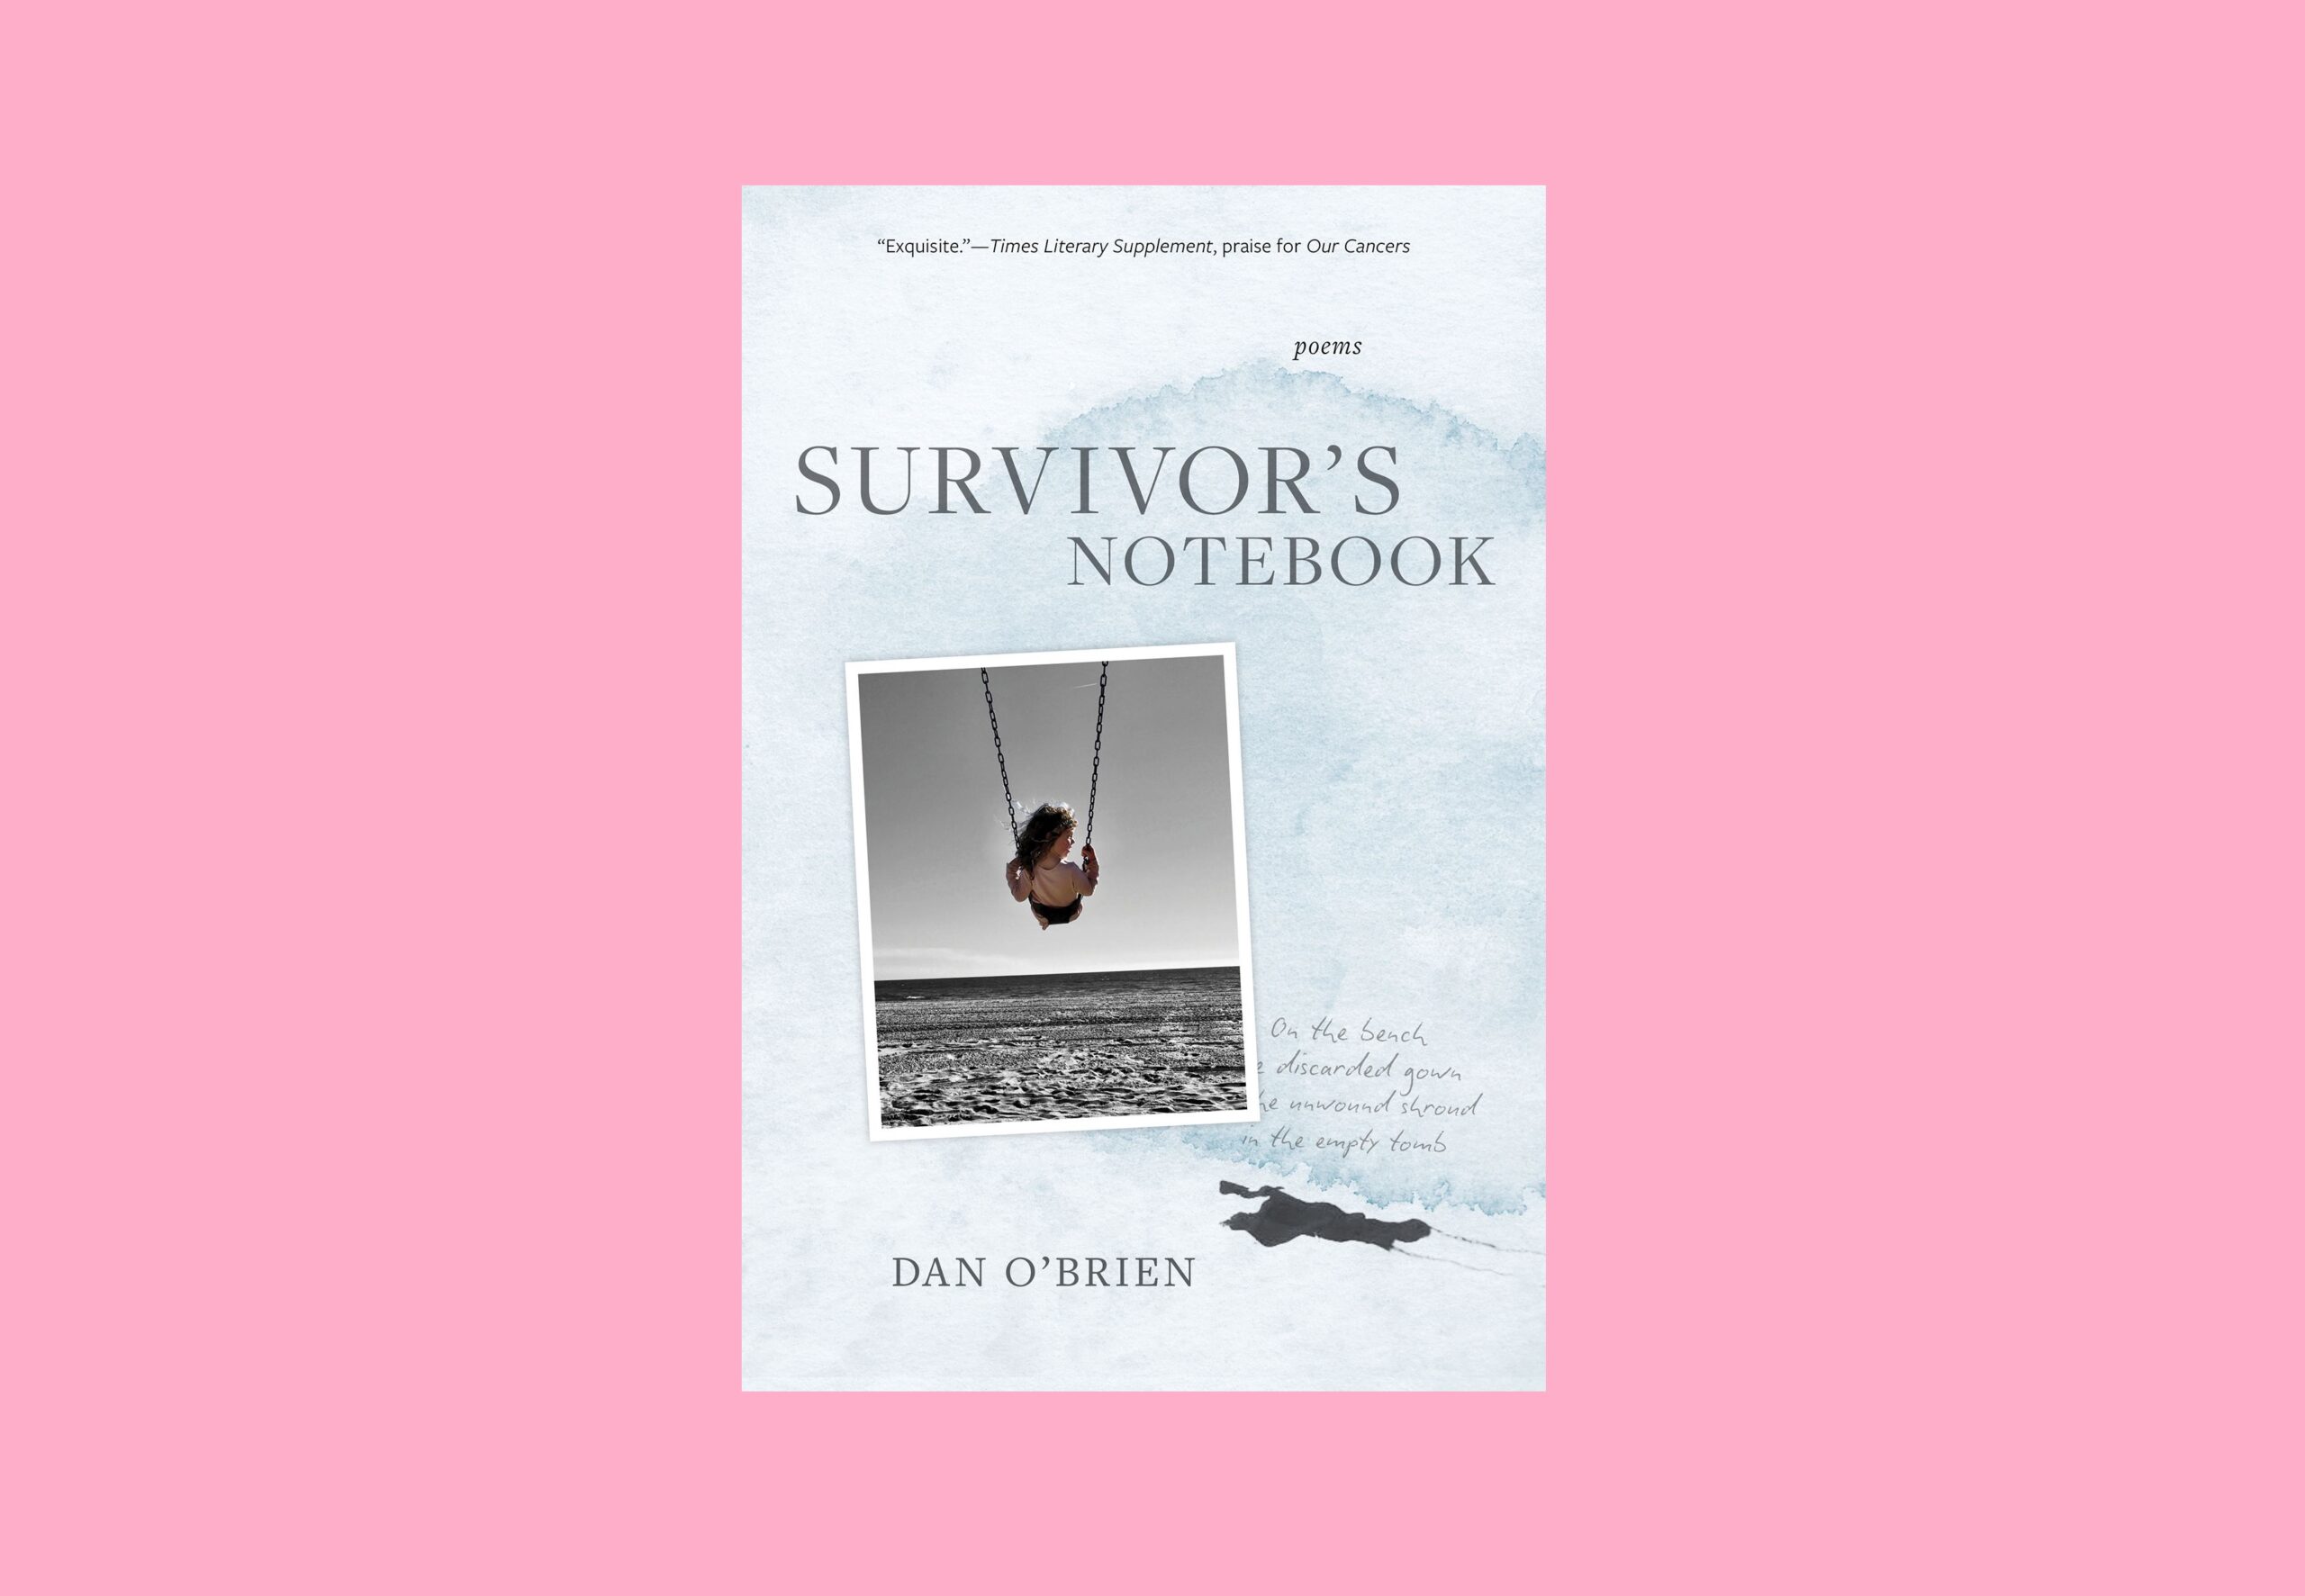 ‘You must live through hell’: On Survivor’s Notebook by Dan O’Brien